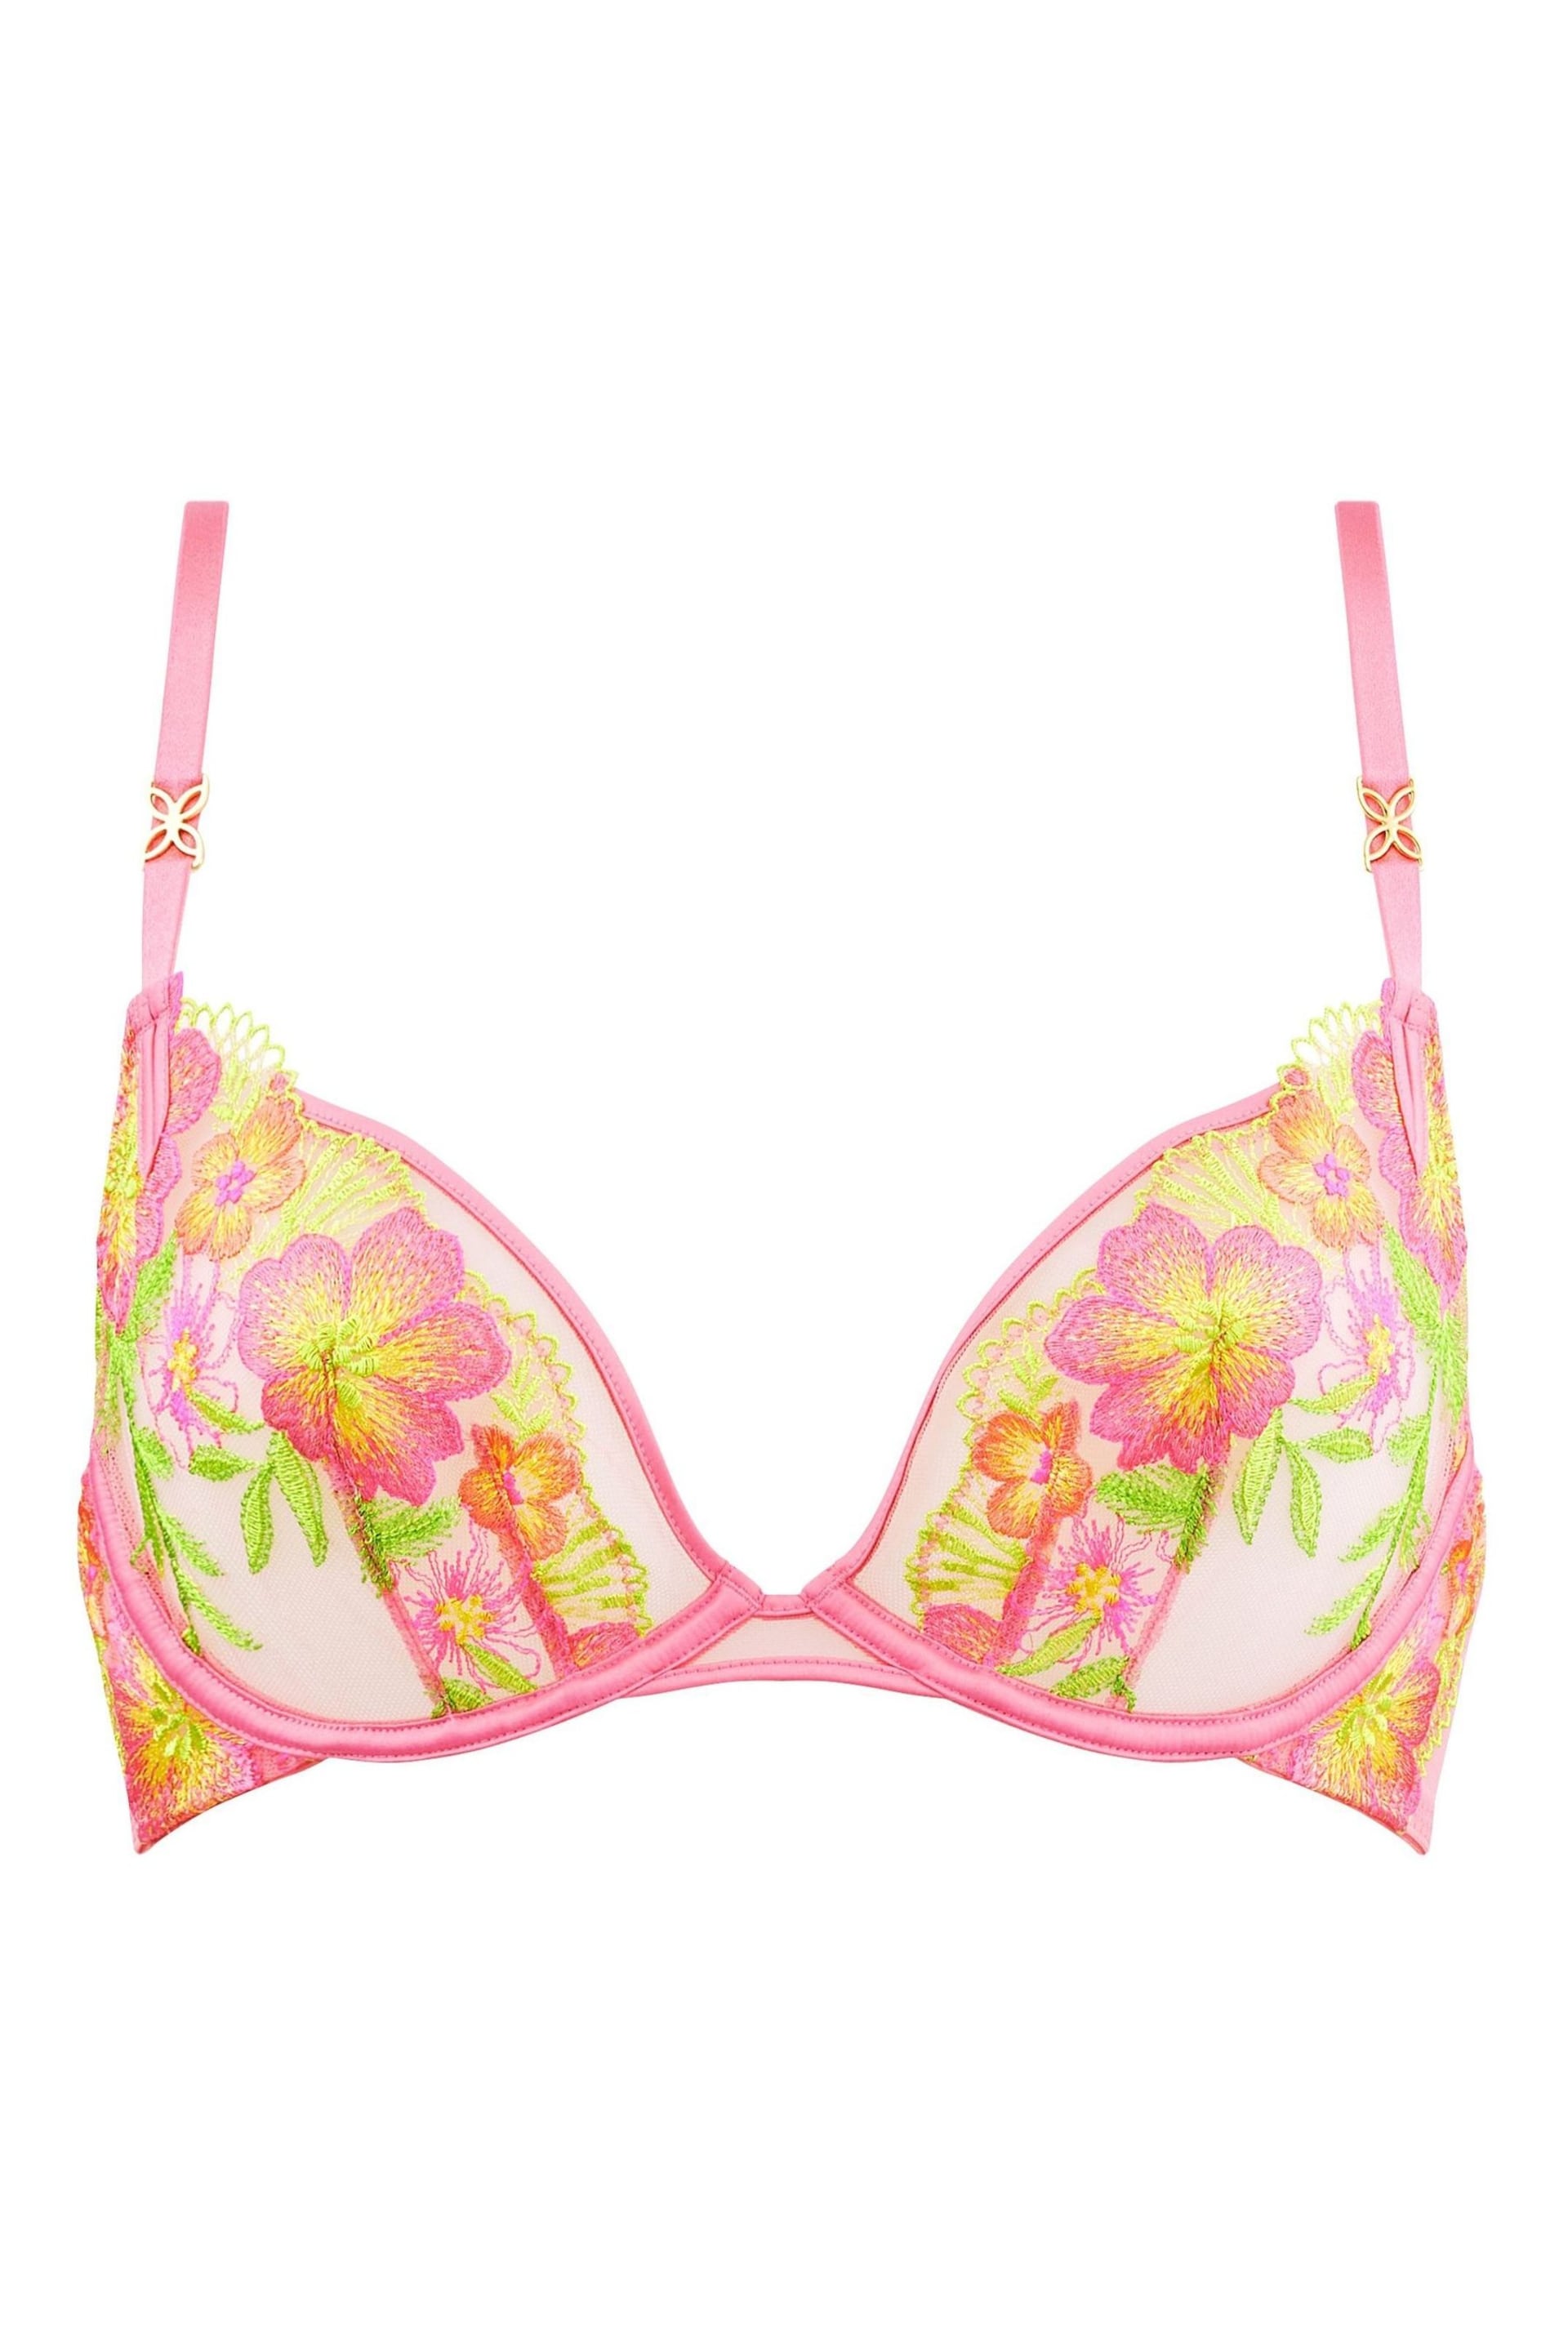 Ann Summers Pink Breeze Embroidered Non Pad Plunge Bra - Image 5 of 5